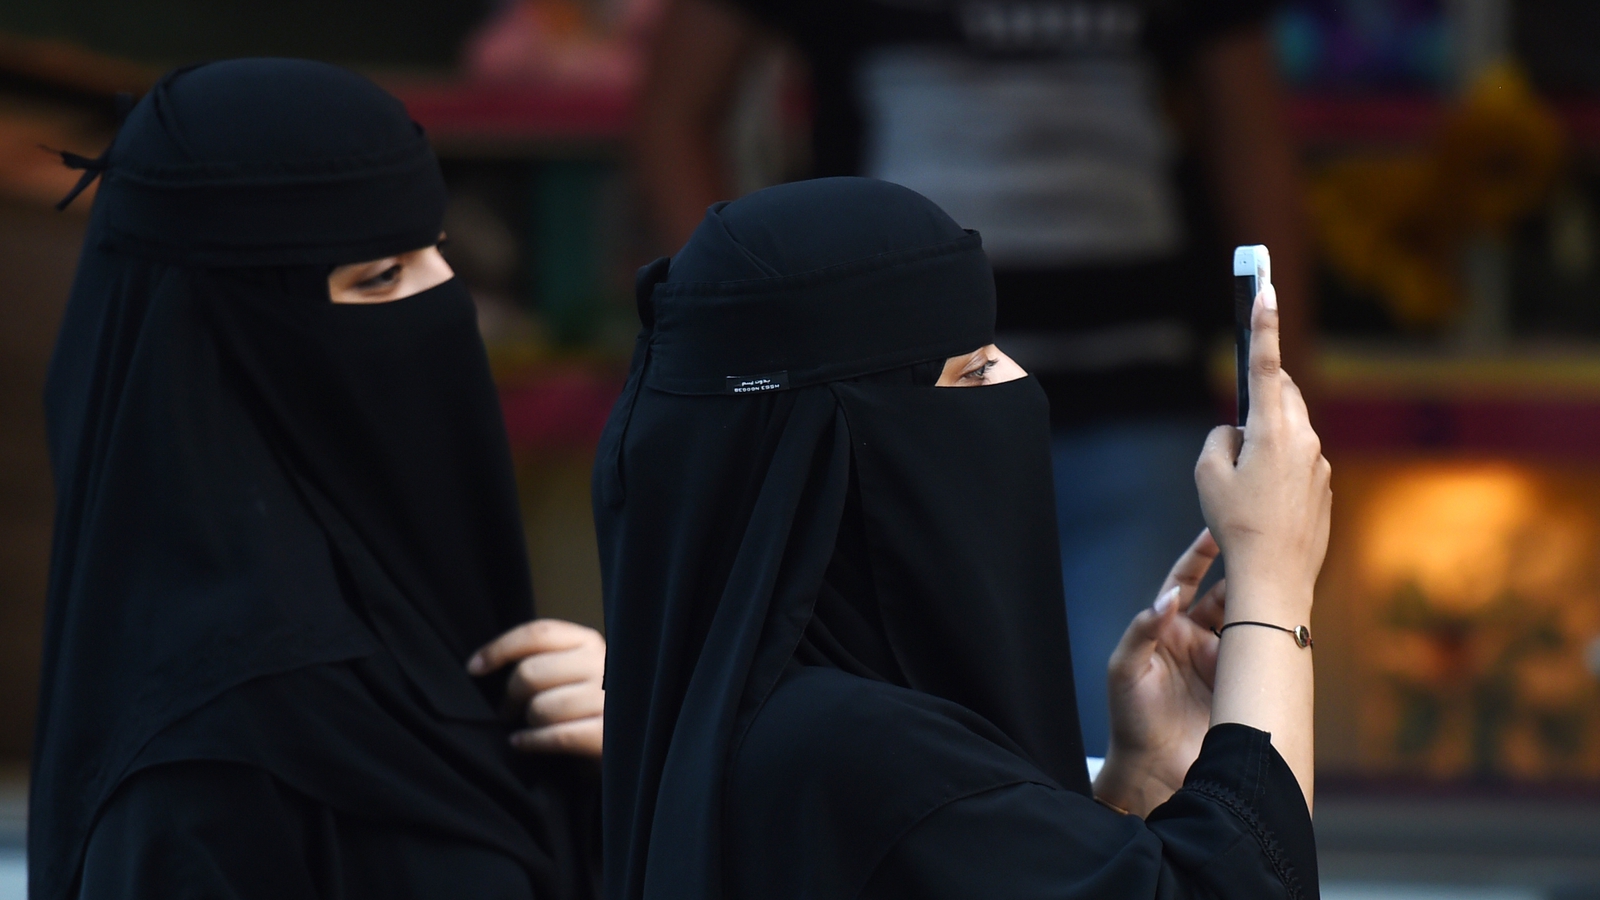 Saudi Arabia to notify women of divorce by text message.